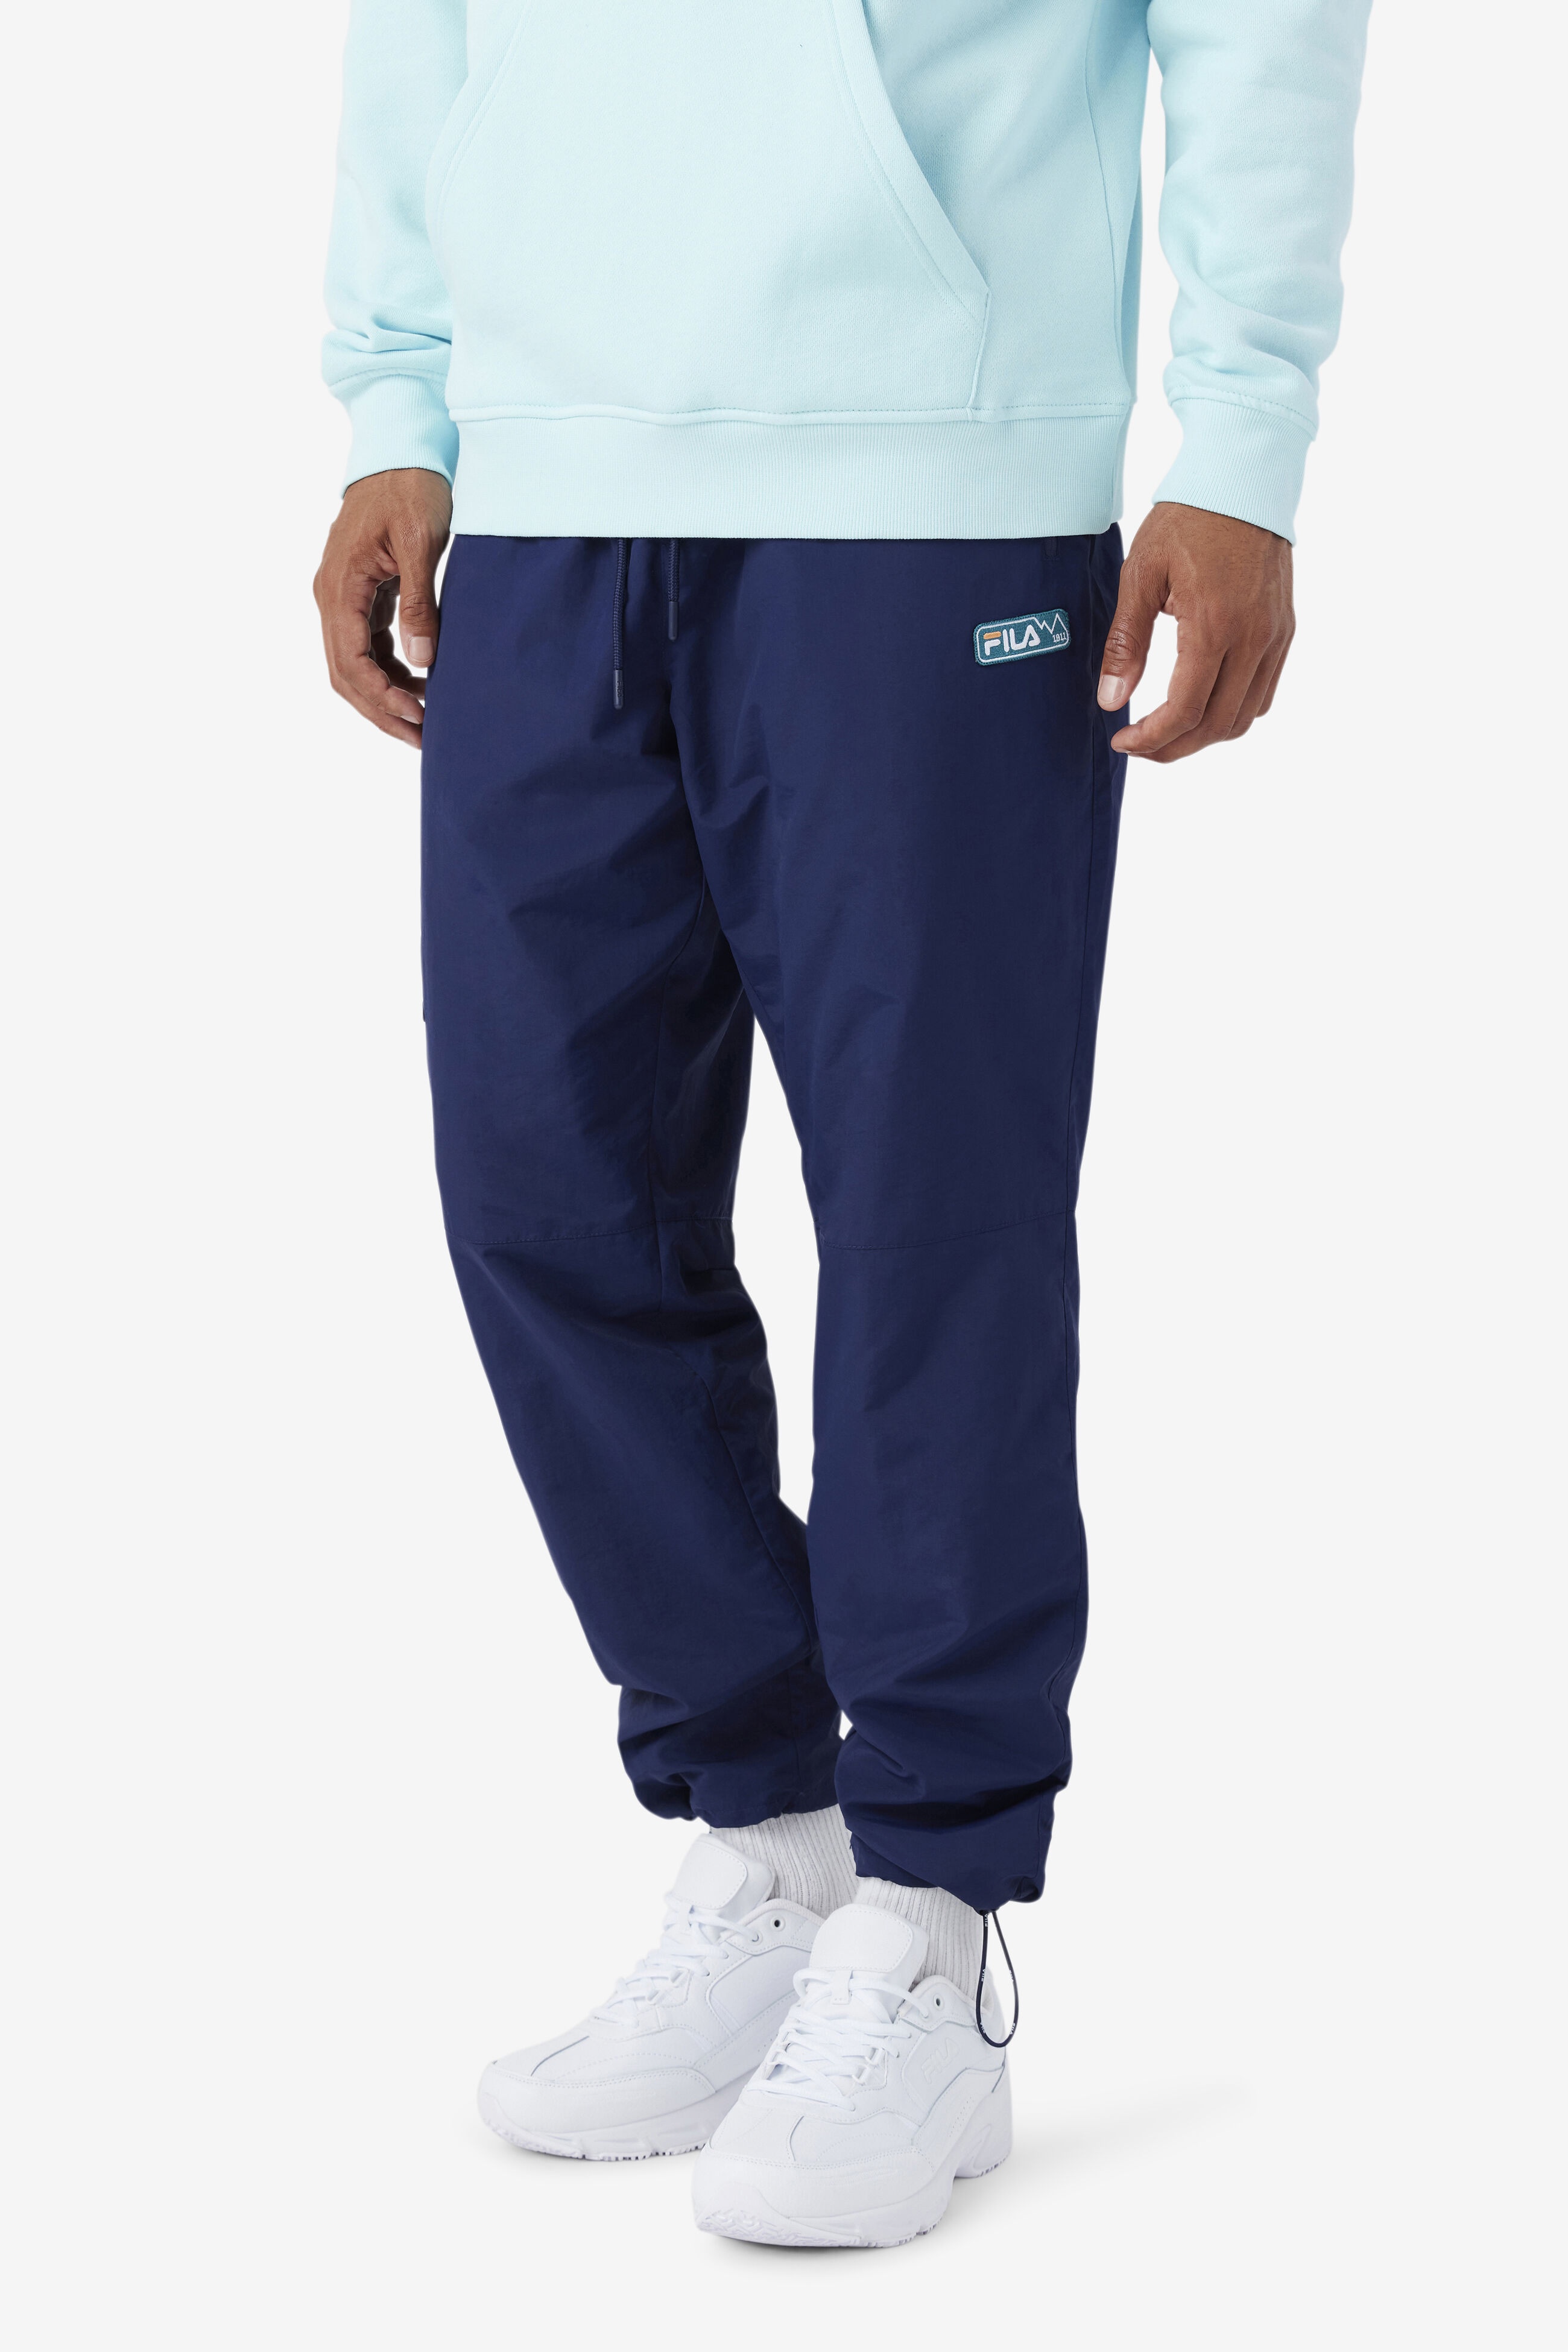 Fila cargo pants with embroidered logo and pockets | ASOS